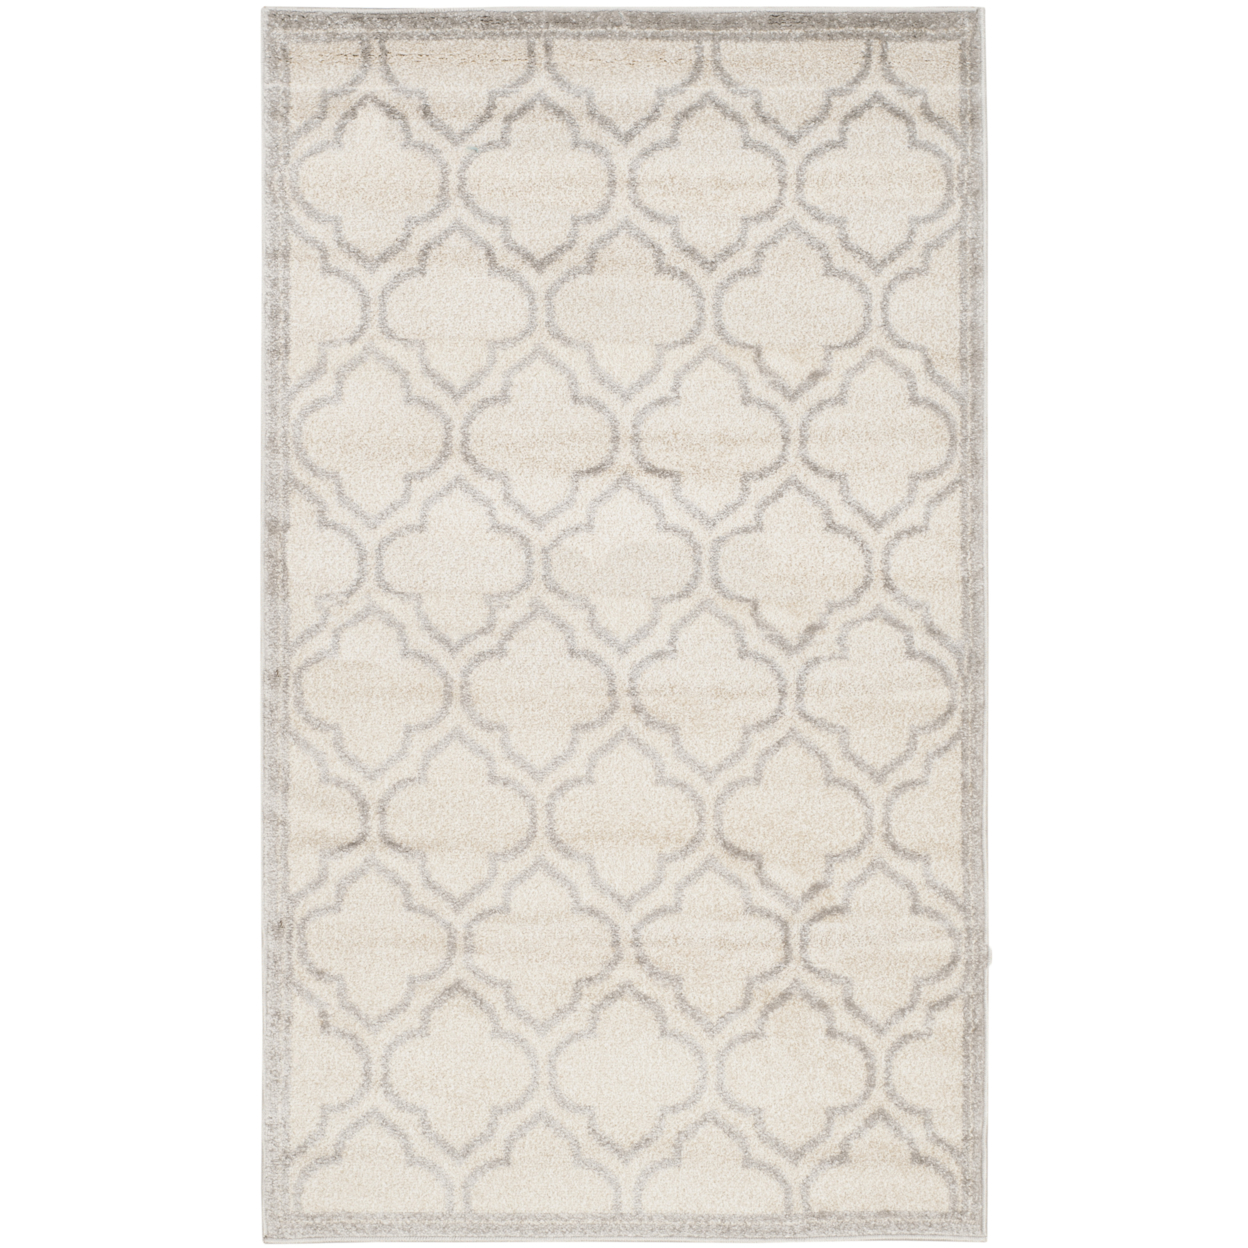 SAFAVIEH Amherst Collection AMT412E Ivory/Light Grey Rug - 3' X 5'